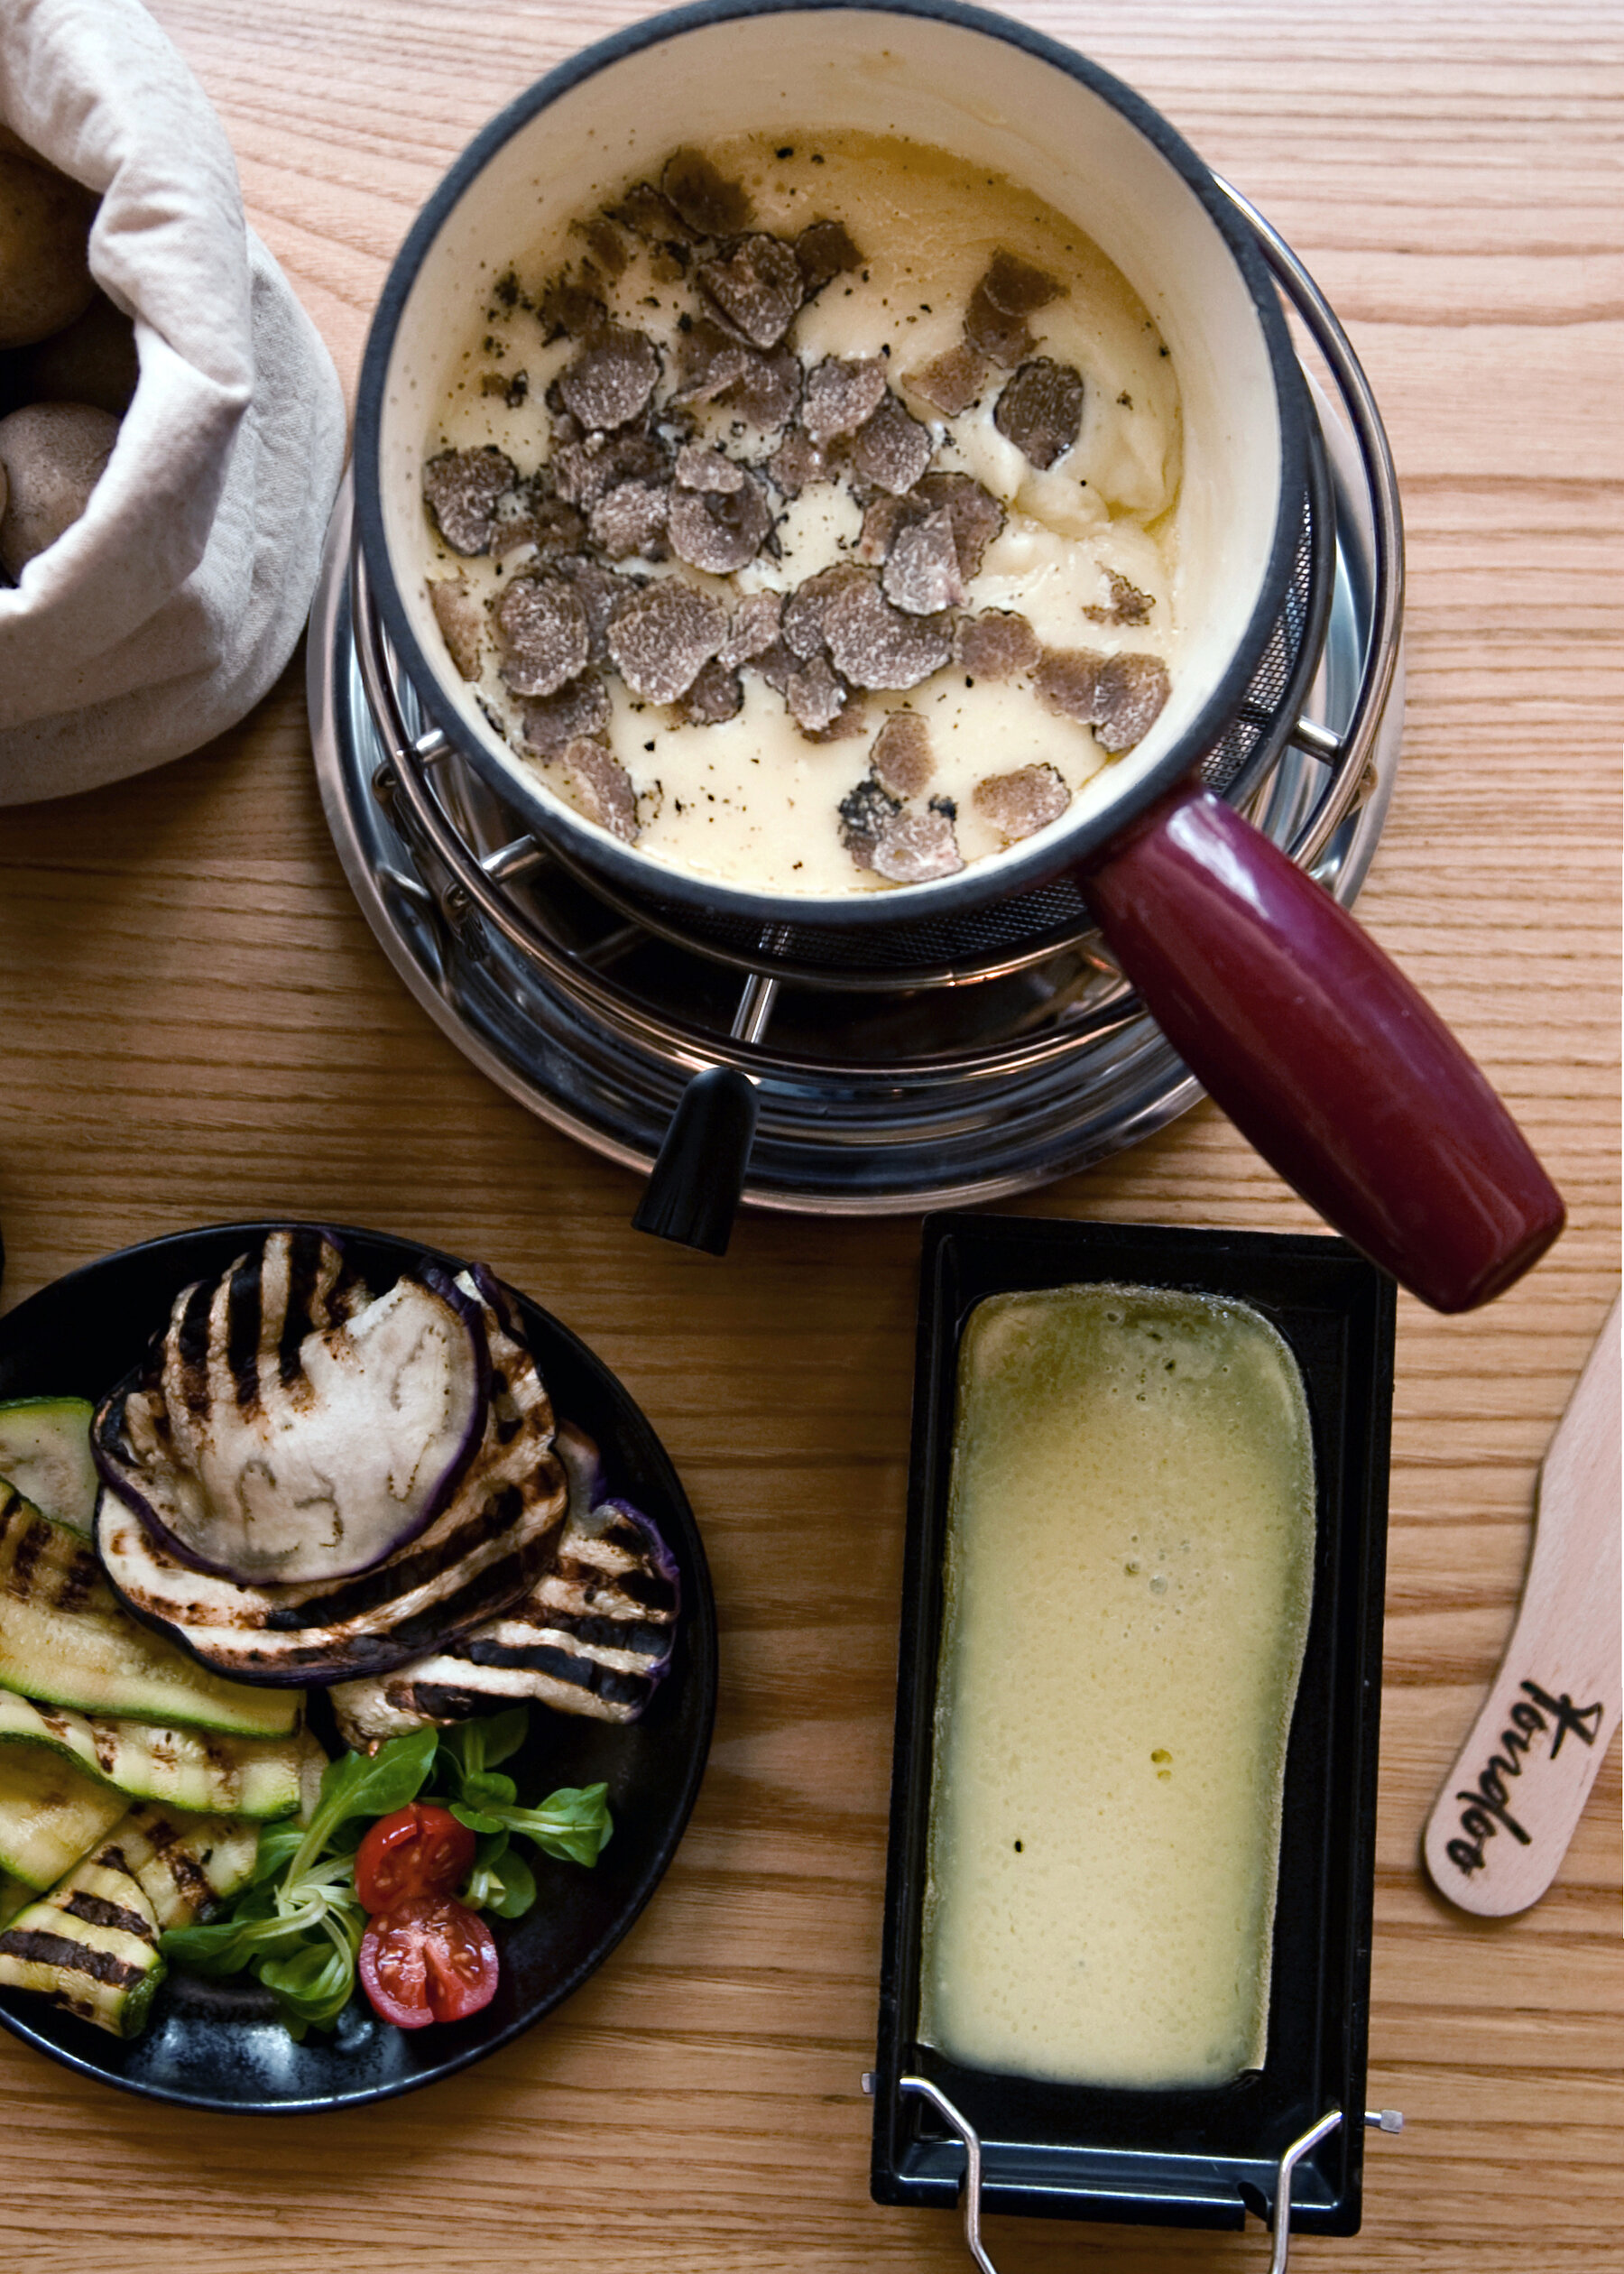 A wooden table is laden will small dishes. There is a small plate of grilled eggplant and zucchini; a plate with a wedge of cheese; and a fondue pot with melted cheese and shaved truffle. 